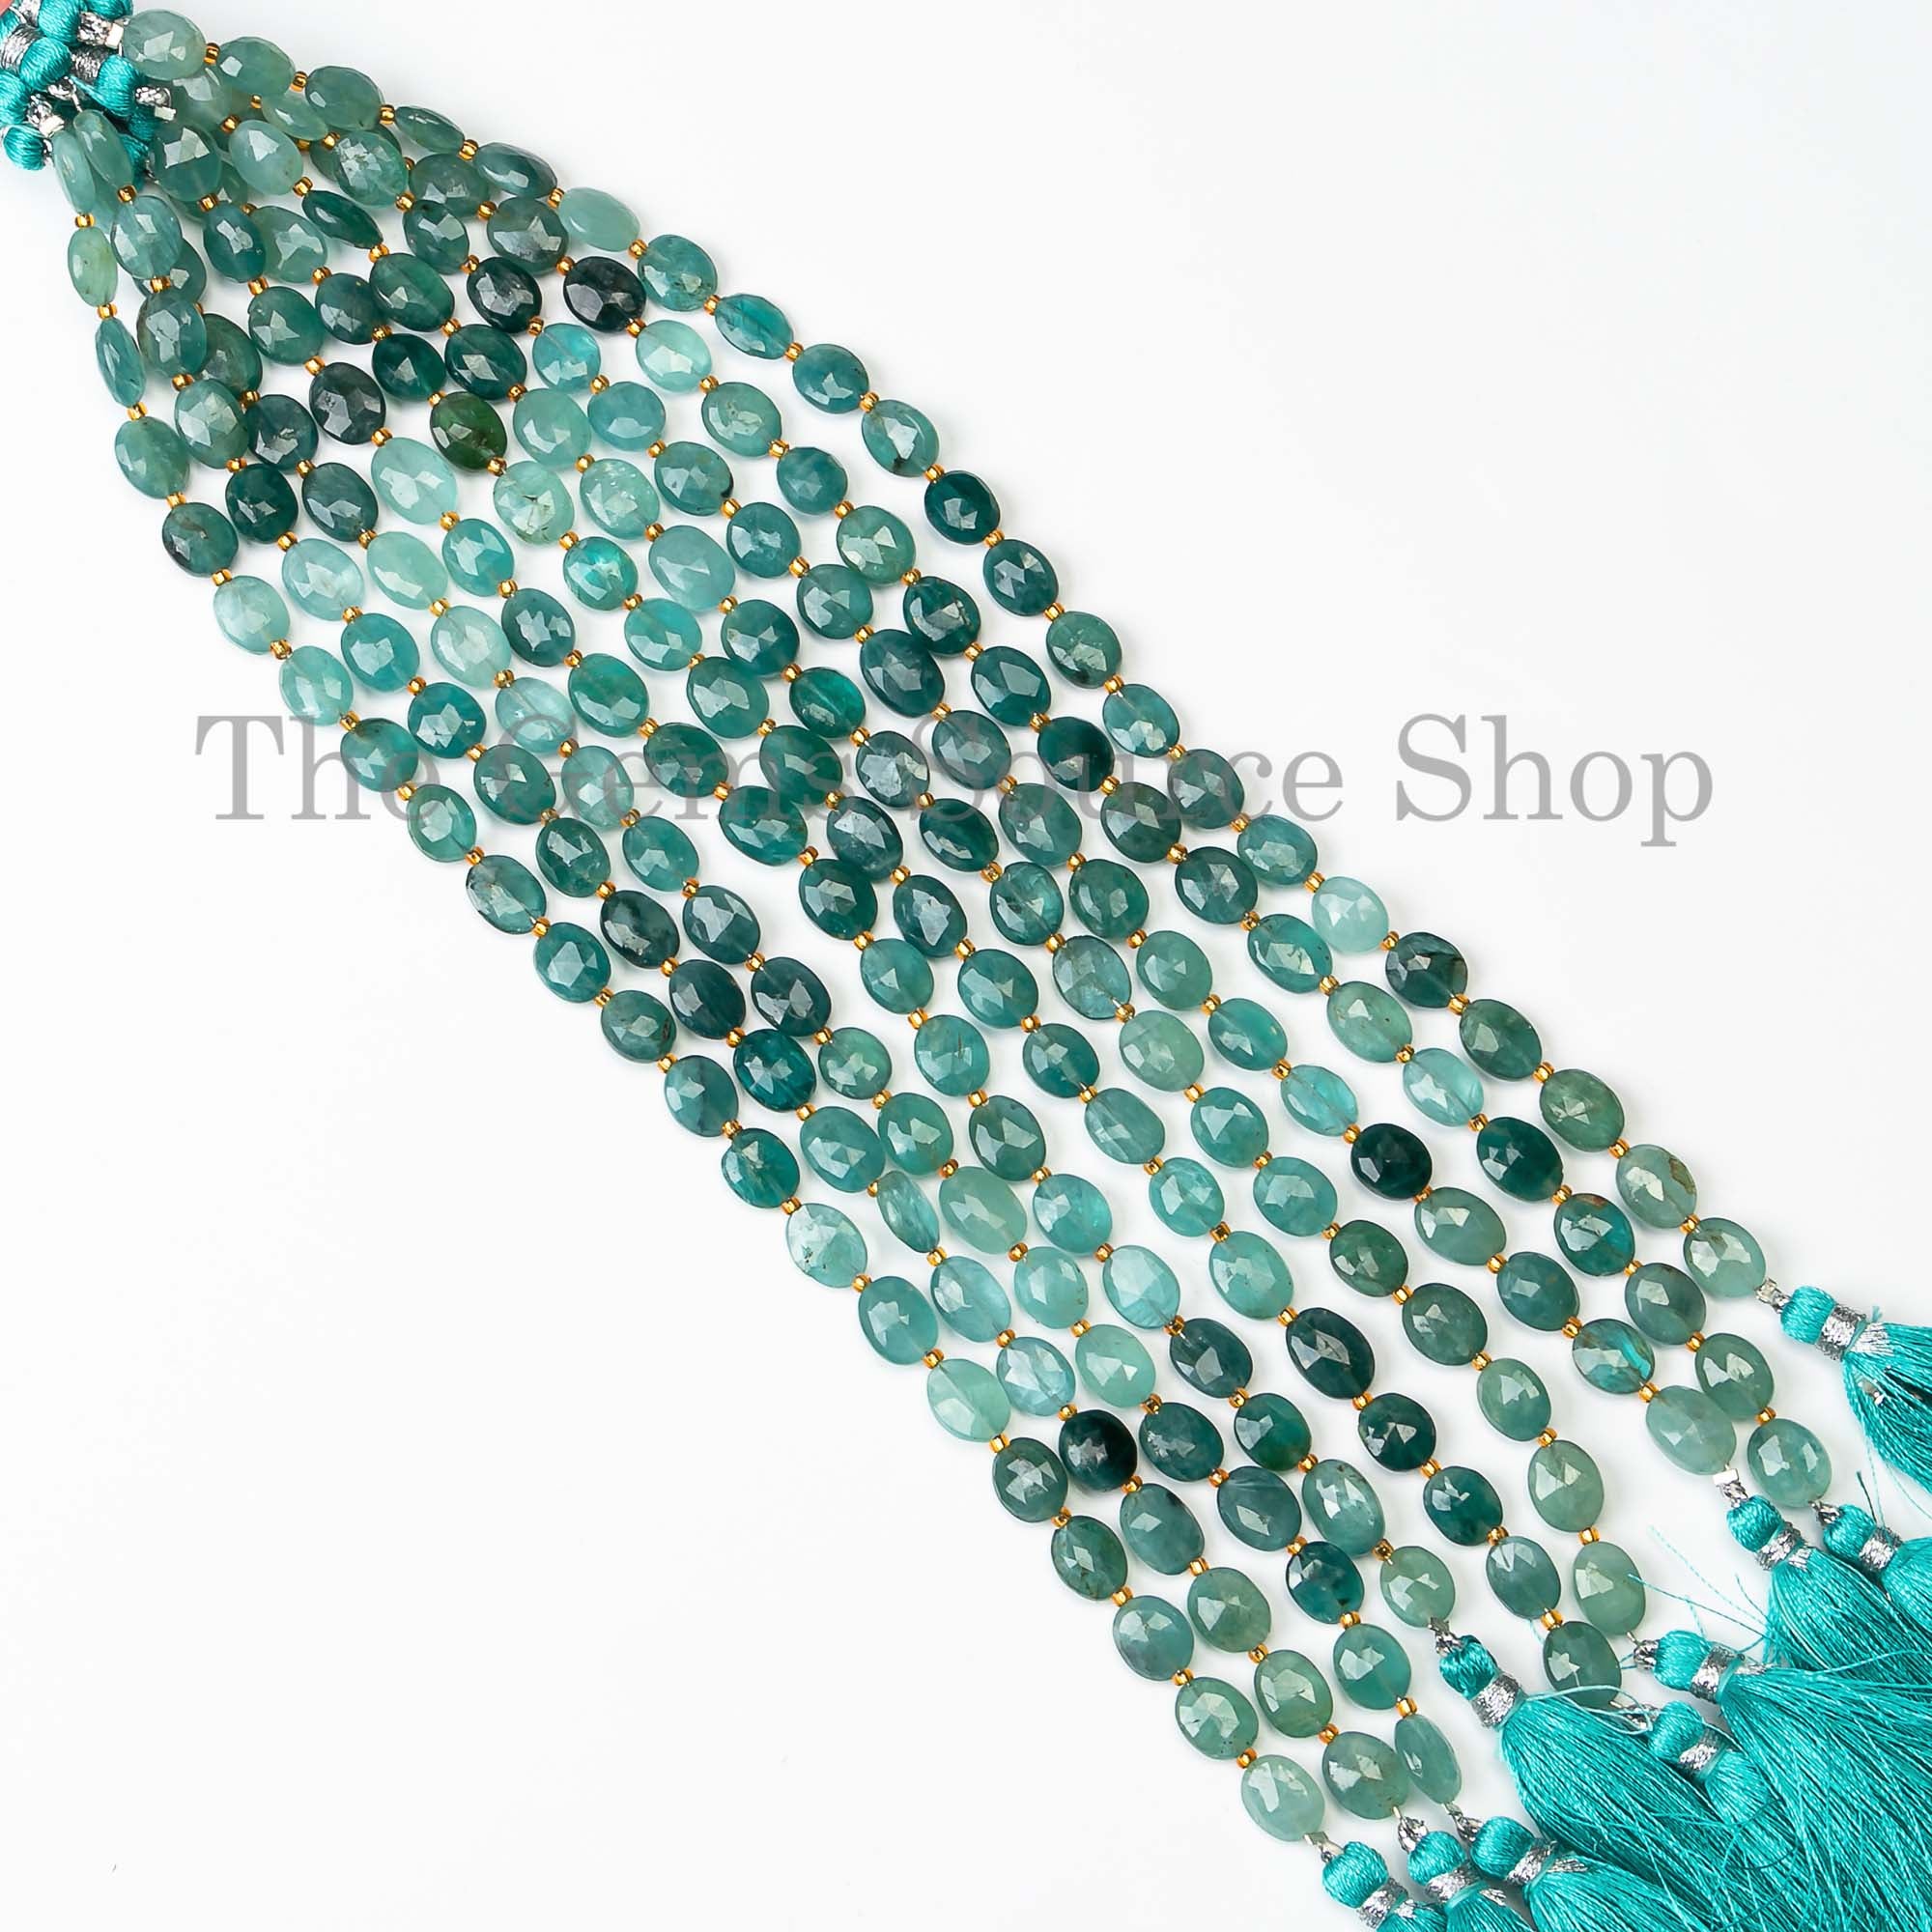 Extremely Natural Grandidierite Faceted Oval Gemstone Beads Briolette Strand